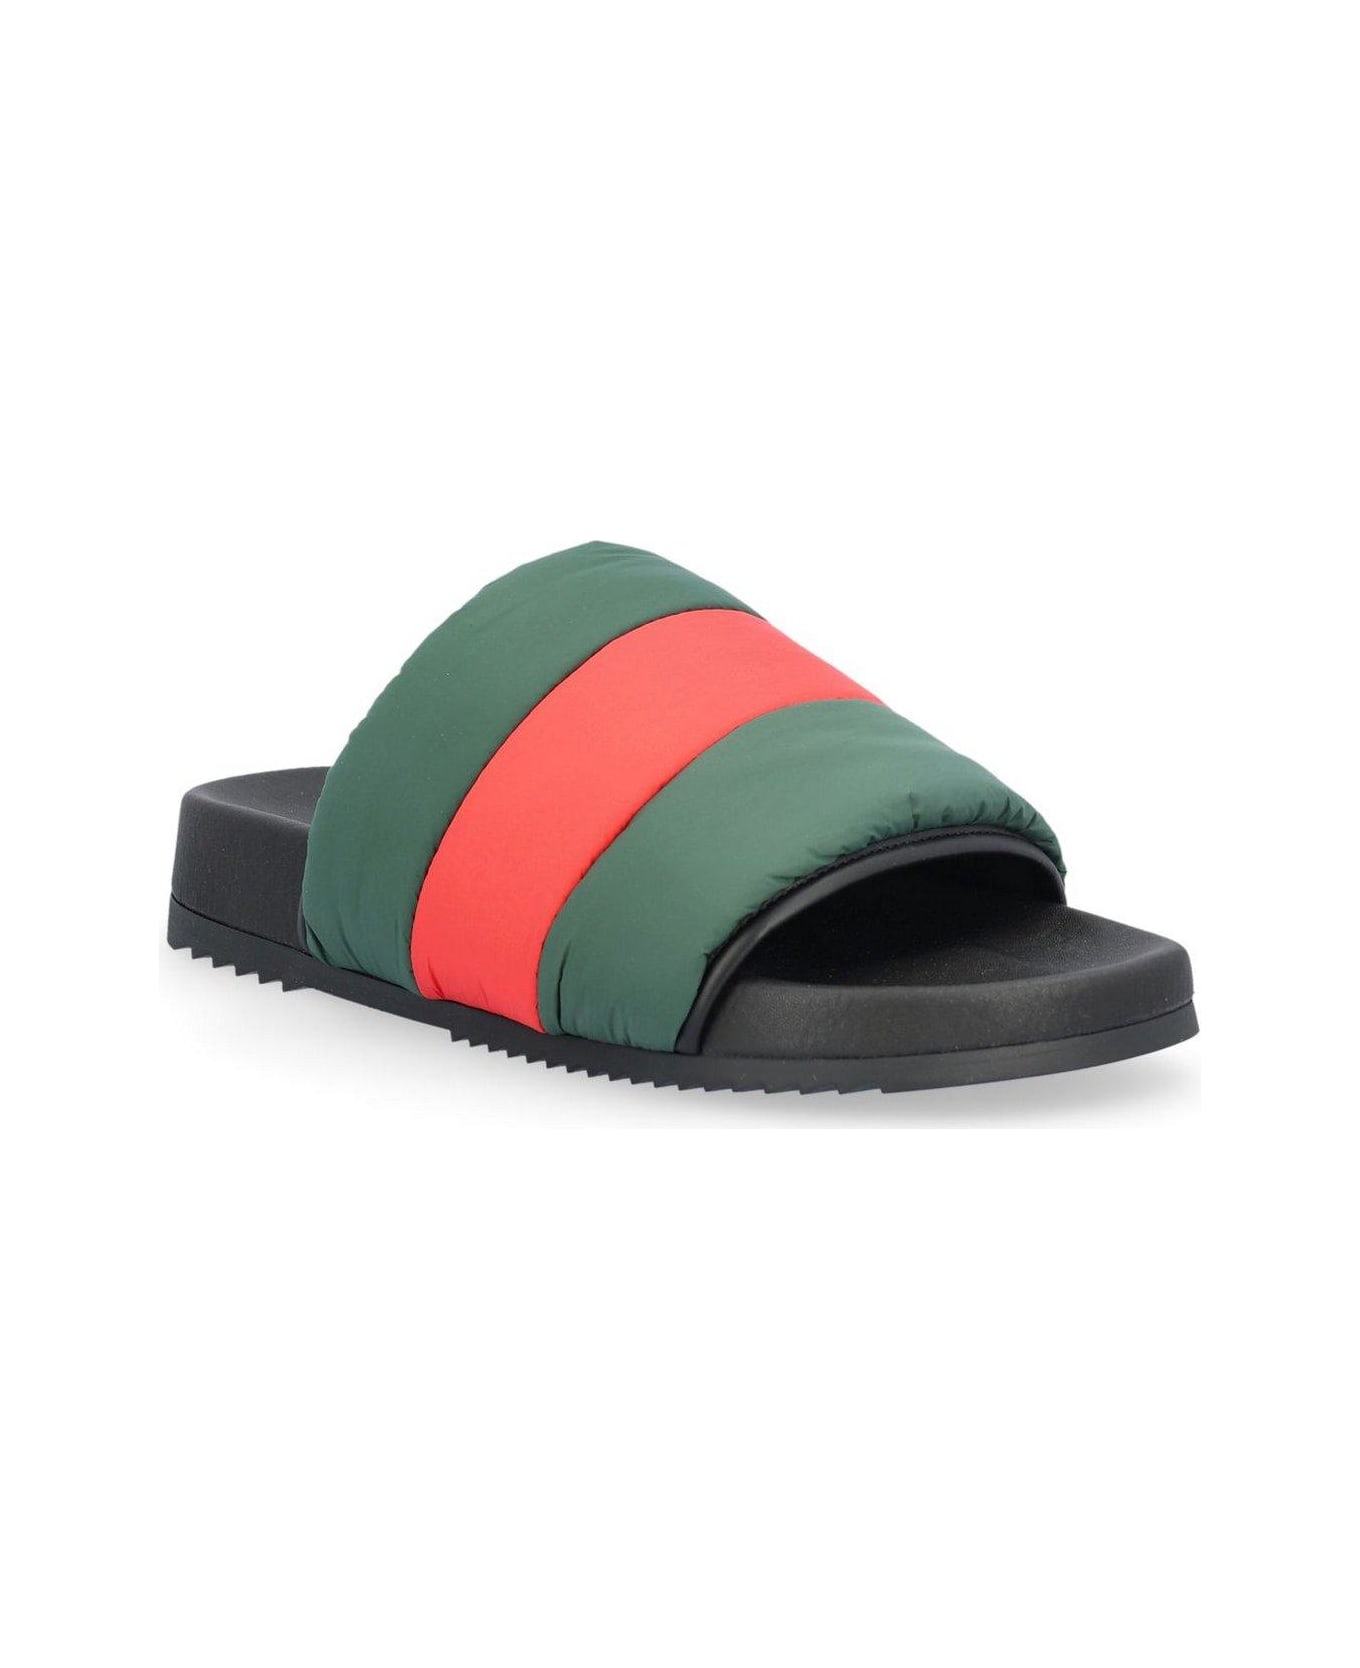 Gucci Padded Web Slide Sandals - Nero その他各種シューズ